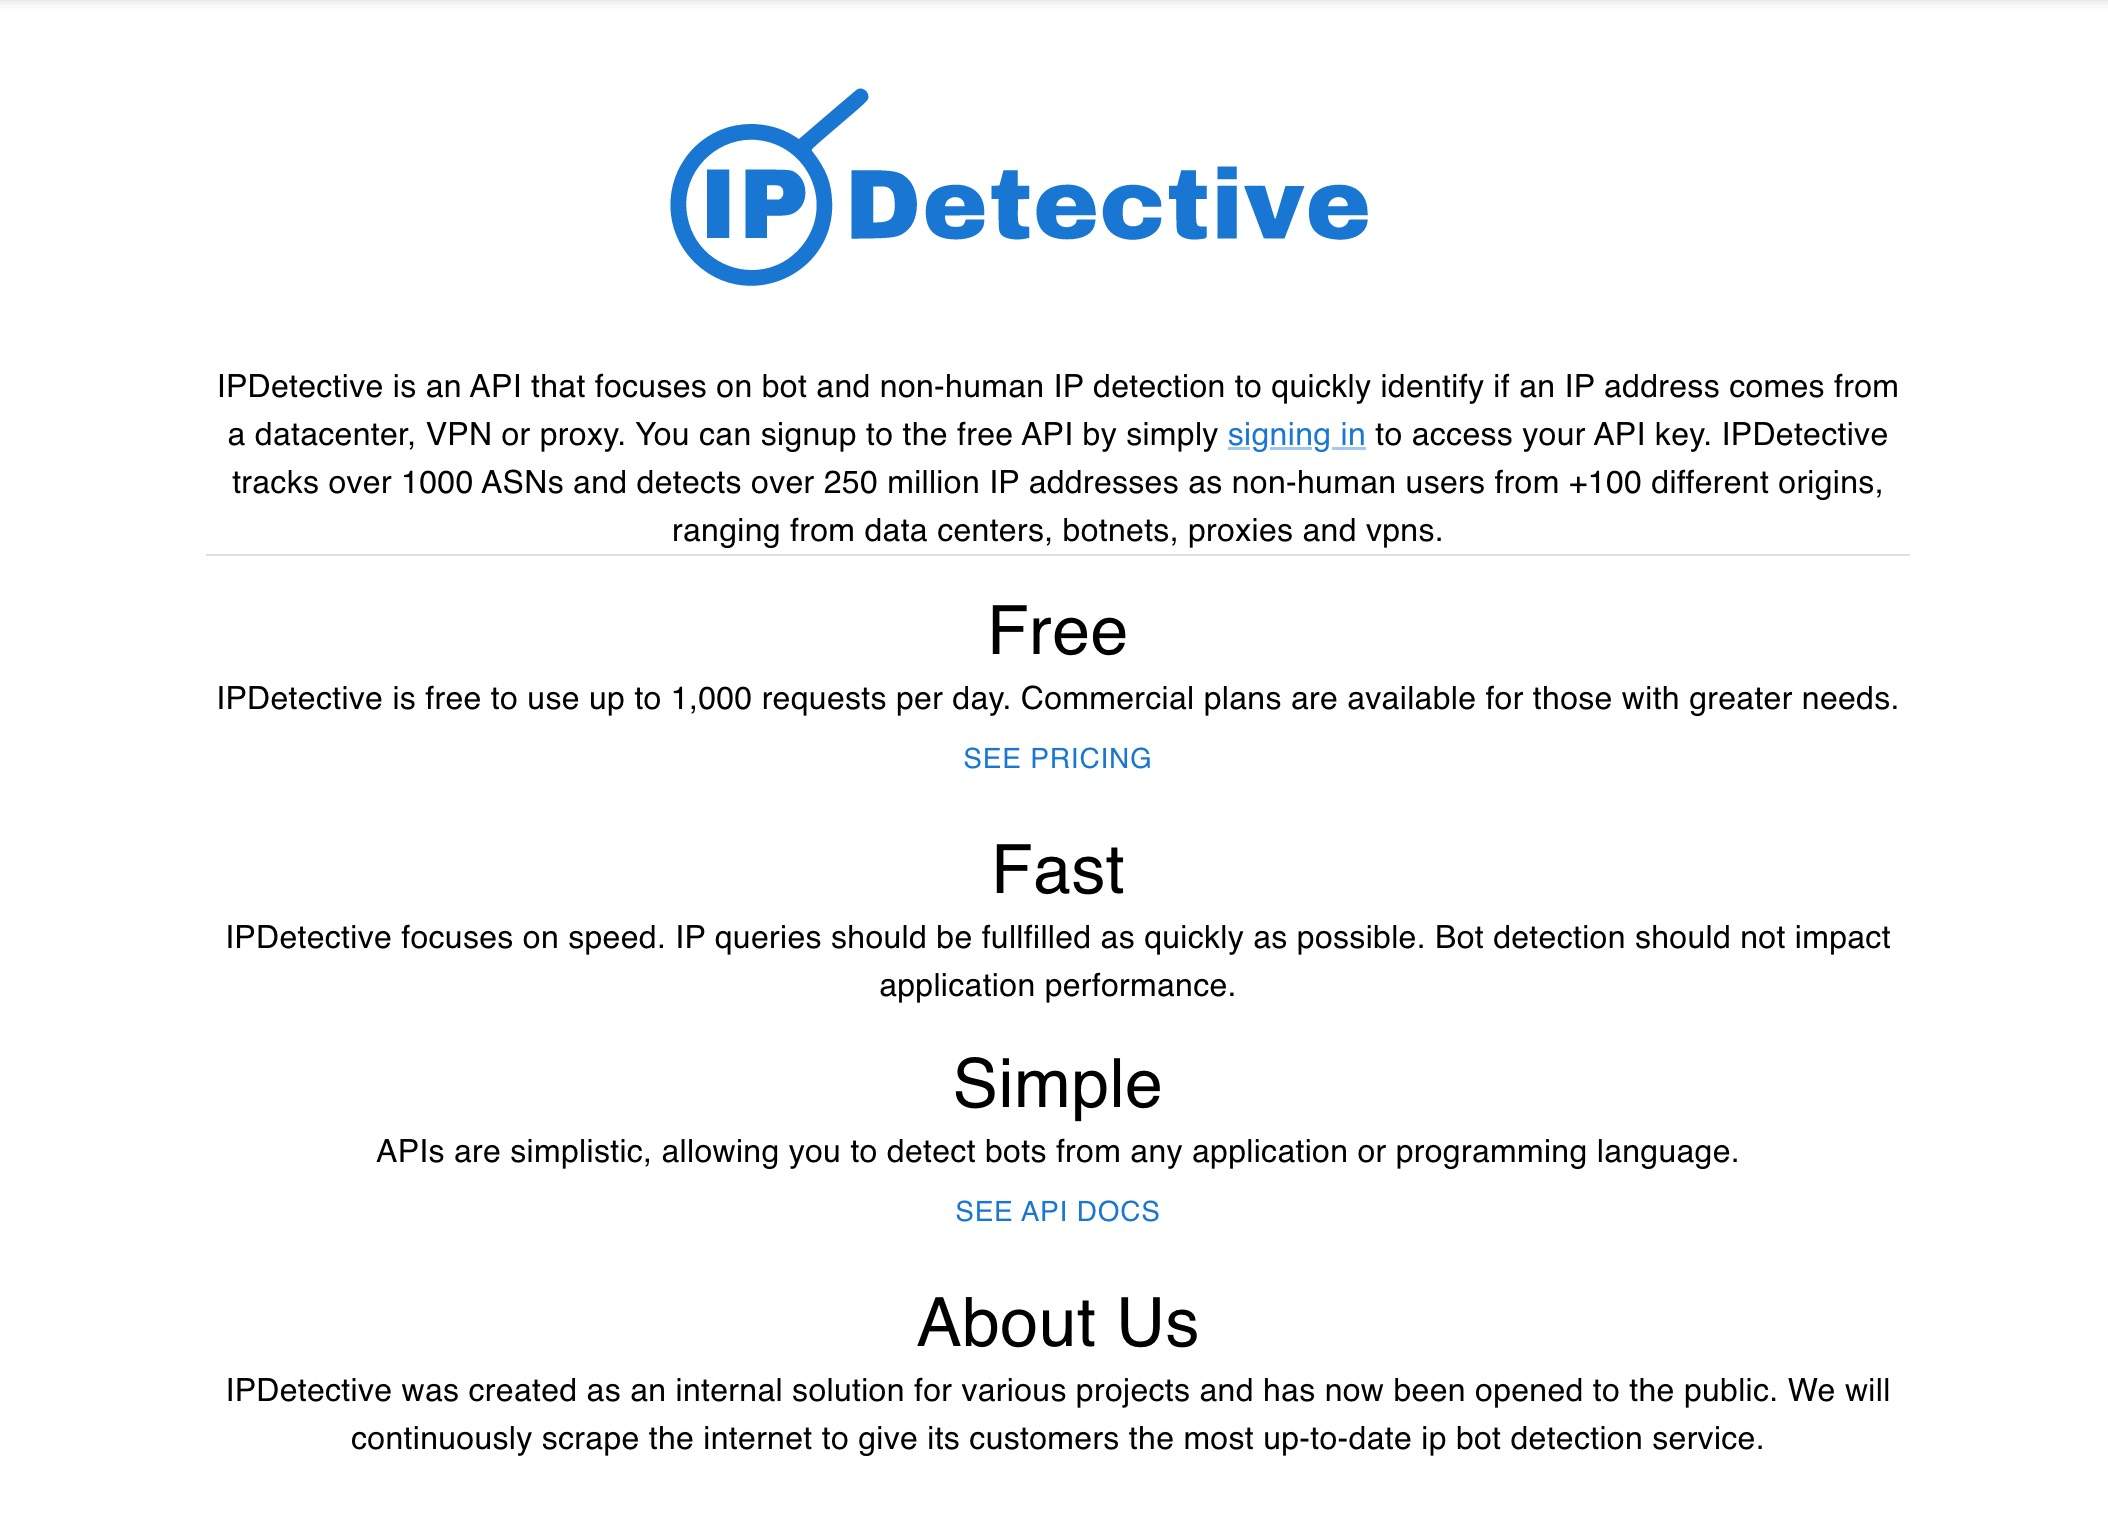 ipdetective